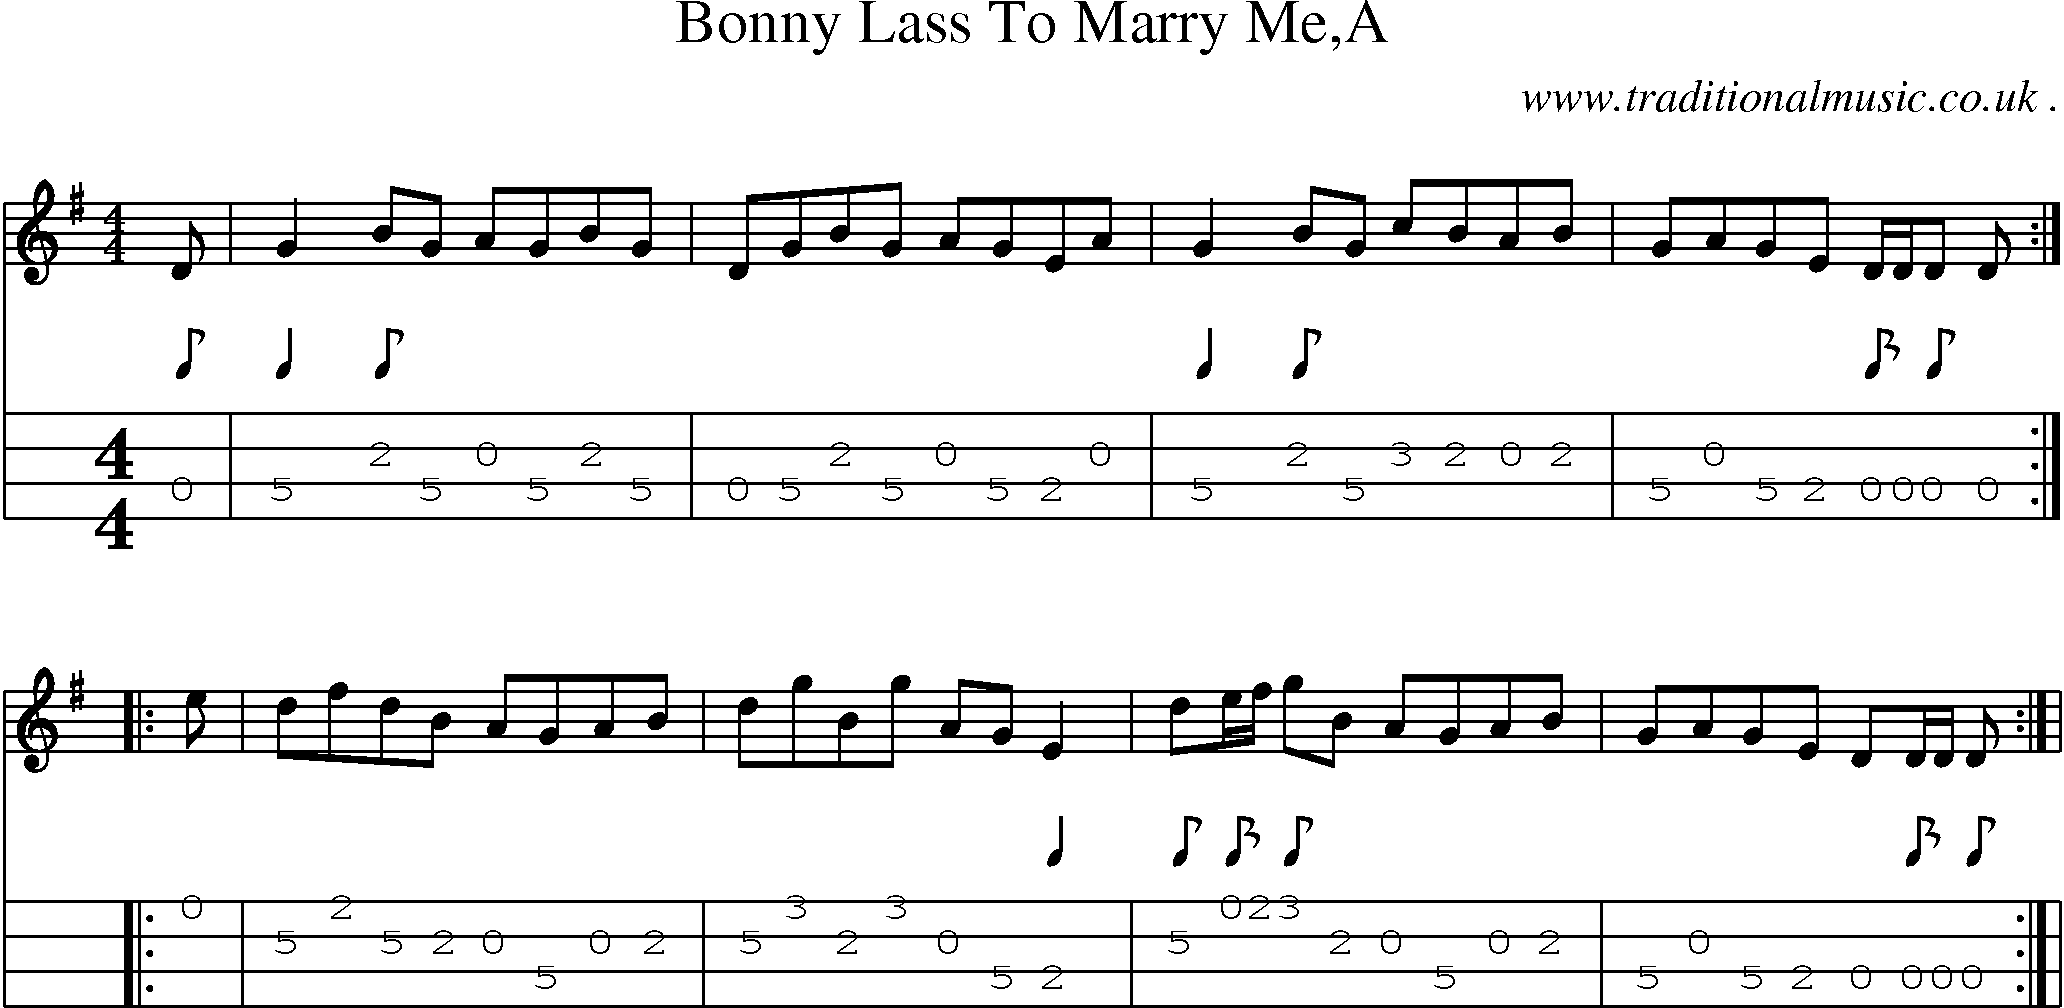 Sheet-Music and Mandolin Tabs for Bonny Lass To Marry Mea